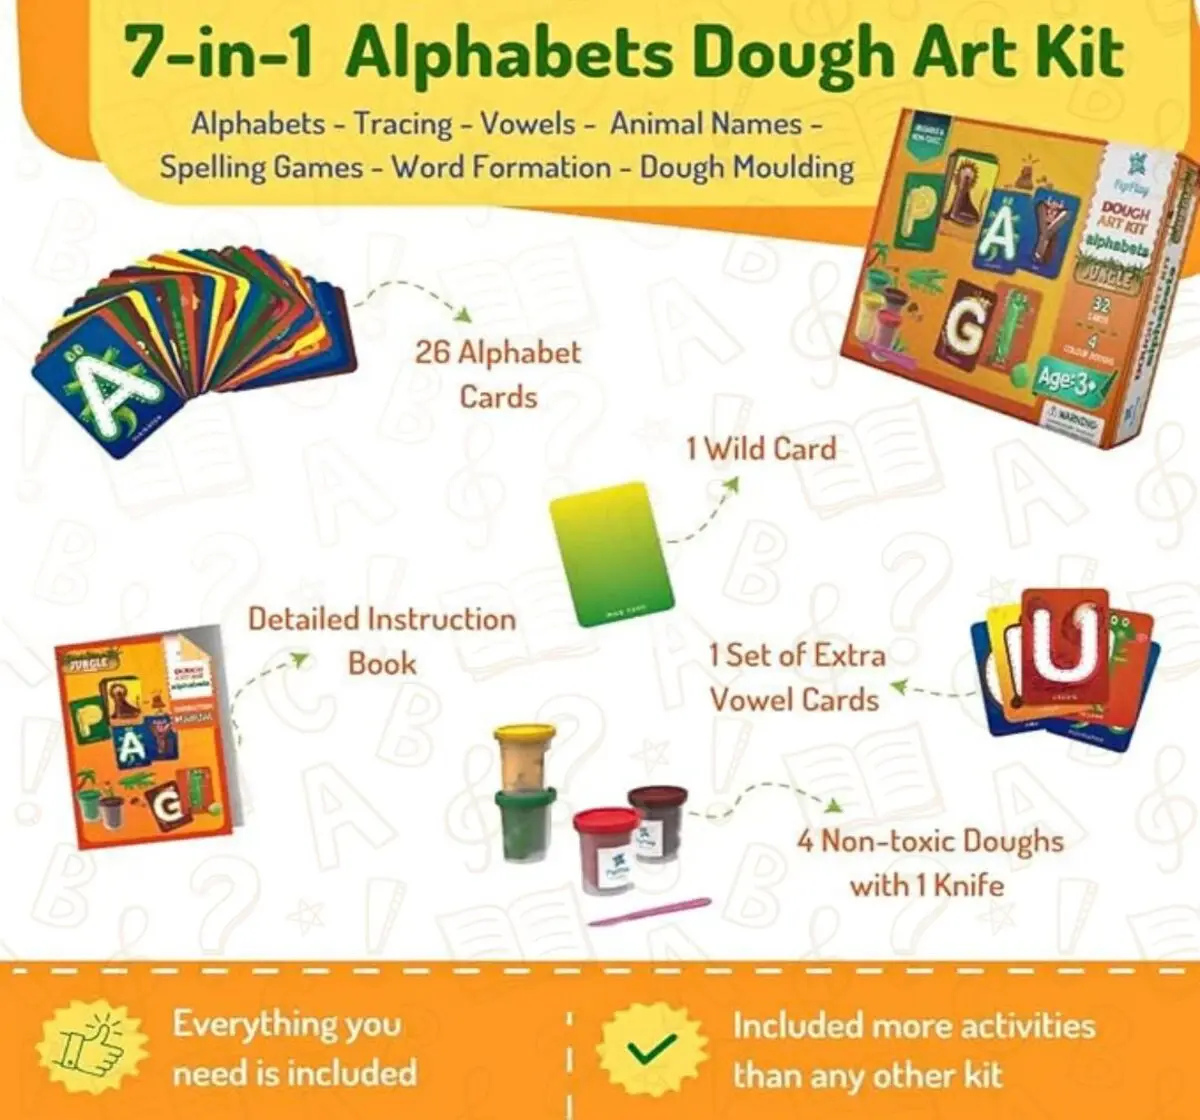 PepPlay Dough Art Kit Alphabets For Kids of Age 3Y+, Multicolour